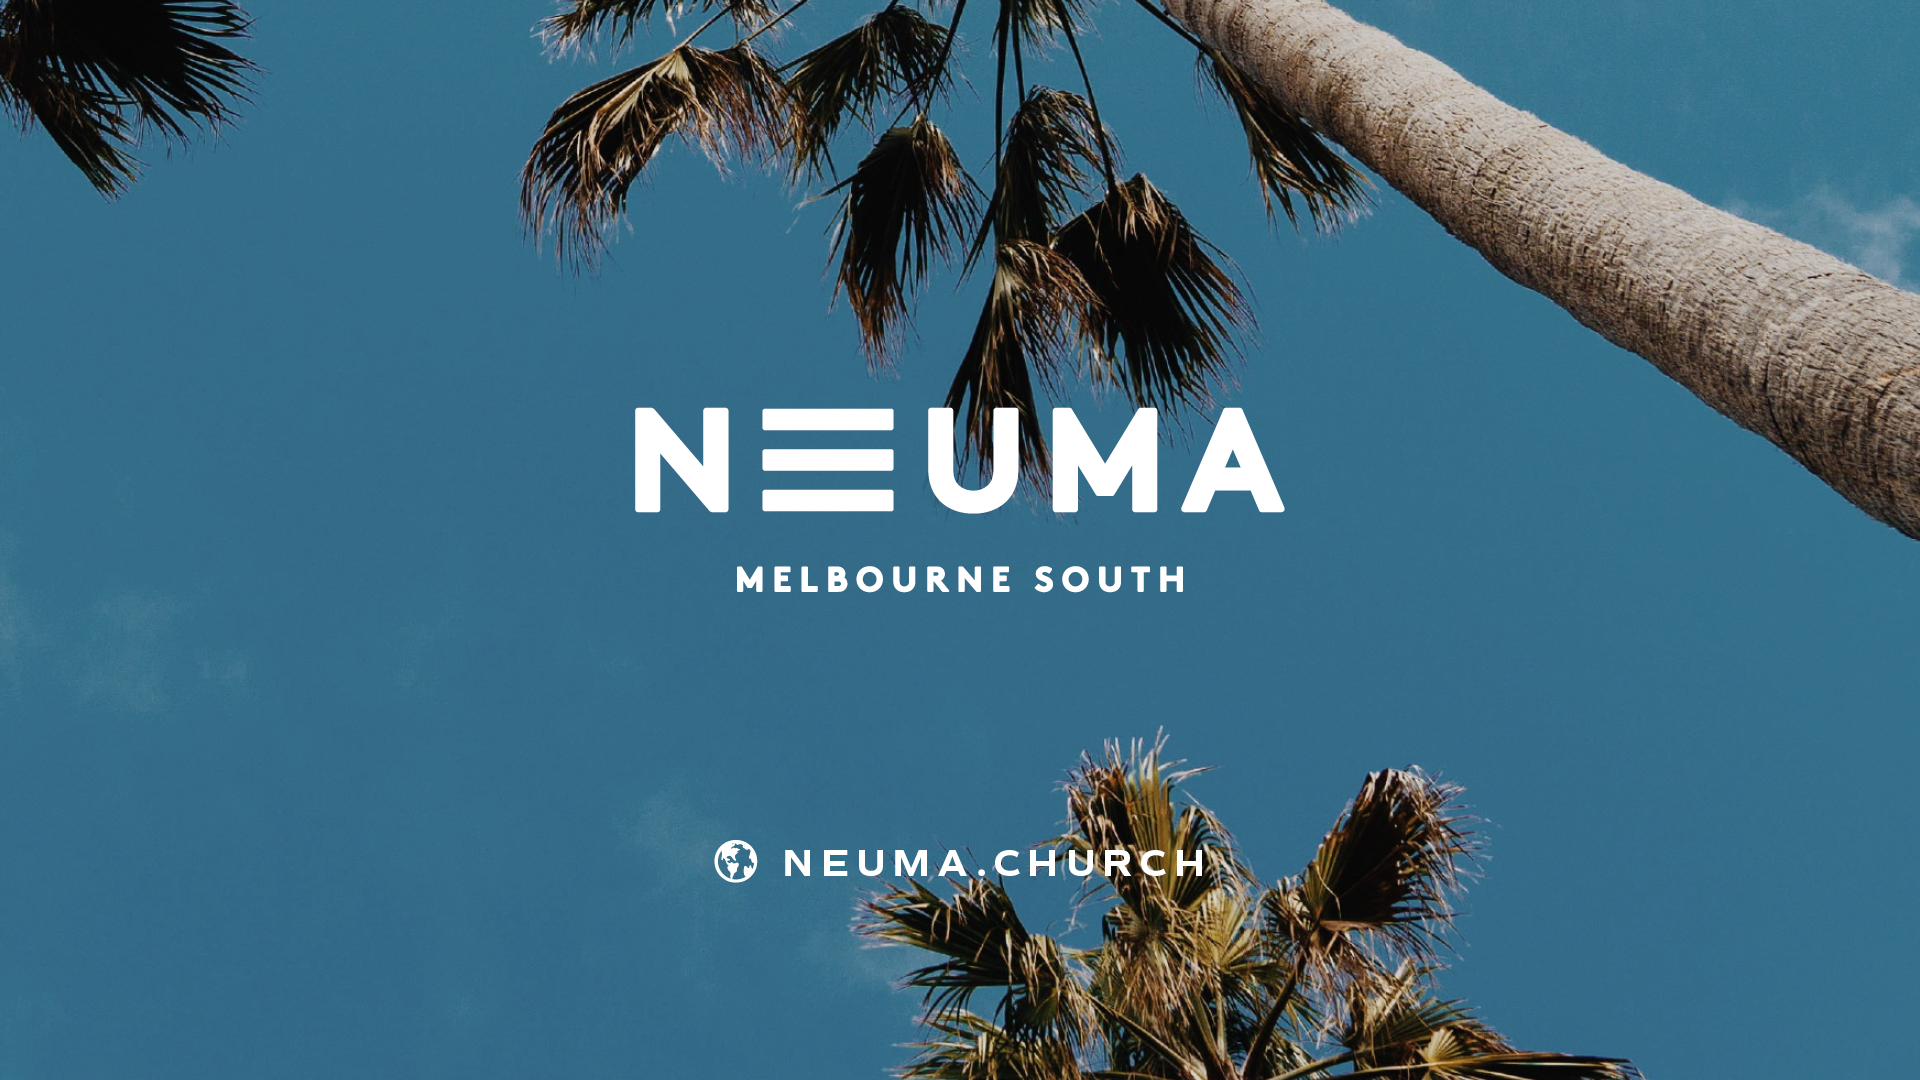 Living With Imperfect People | Dr Allan Meyer | Neuma Church Melbourne South